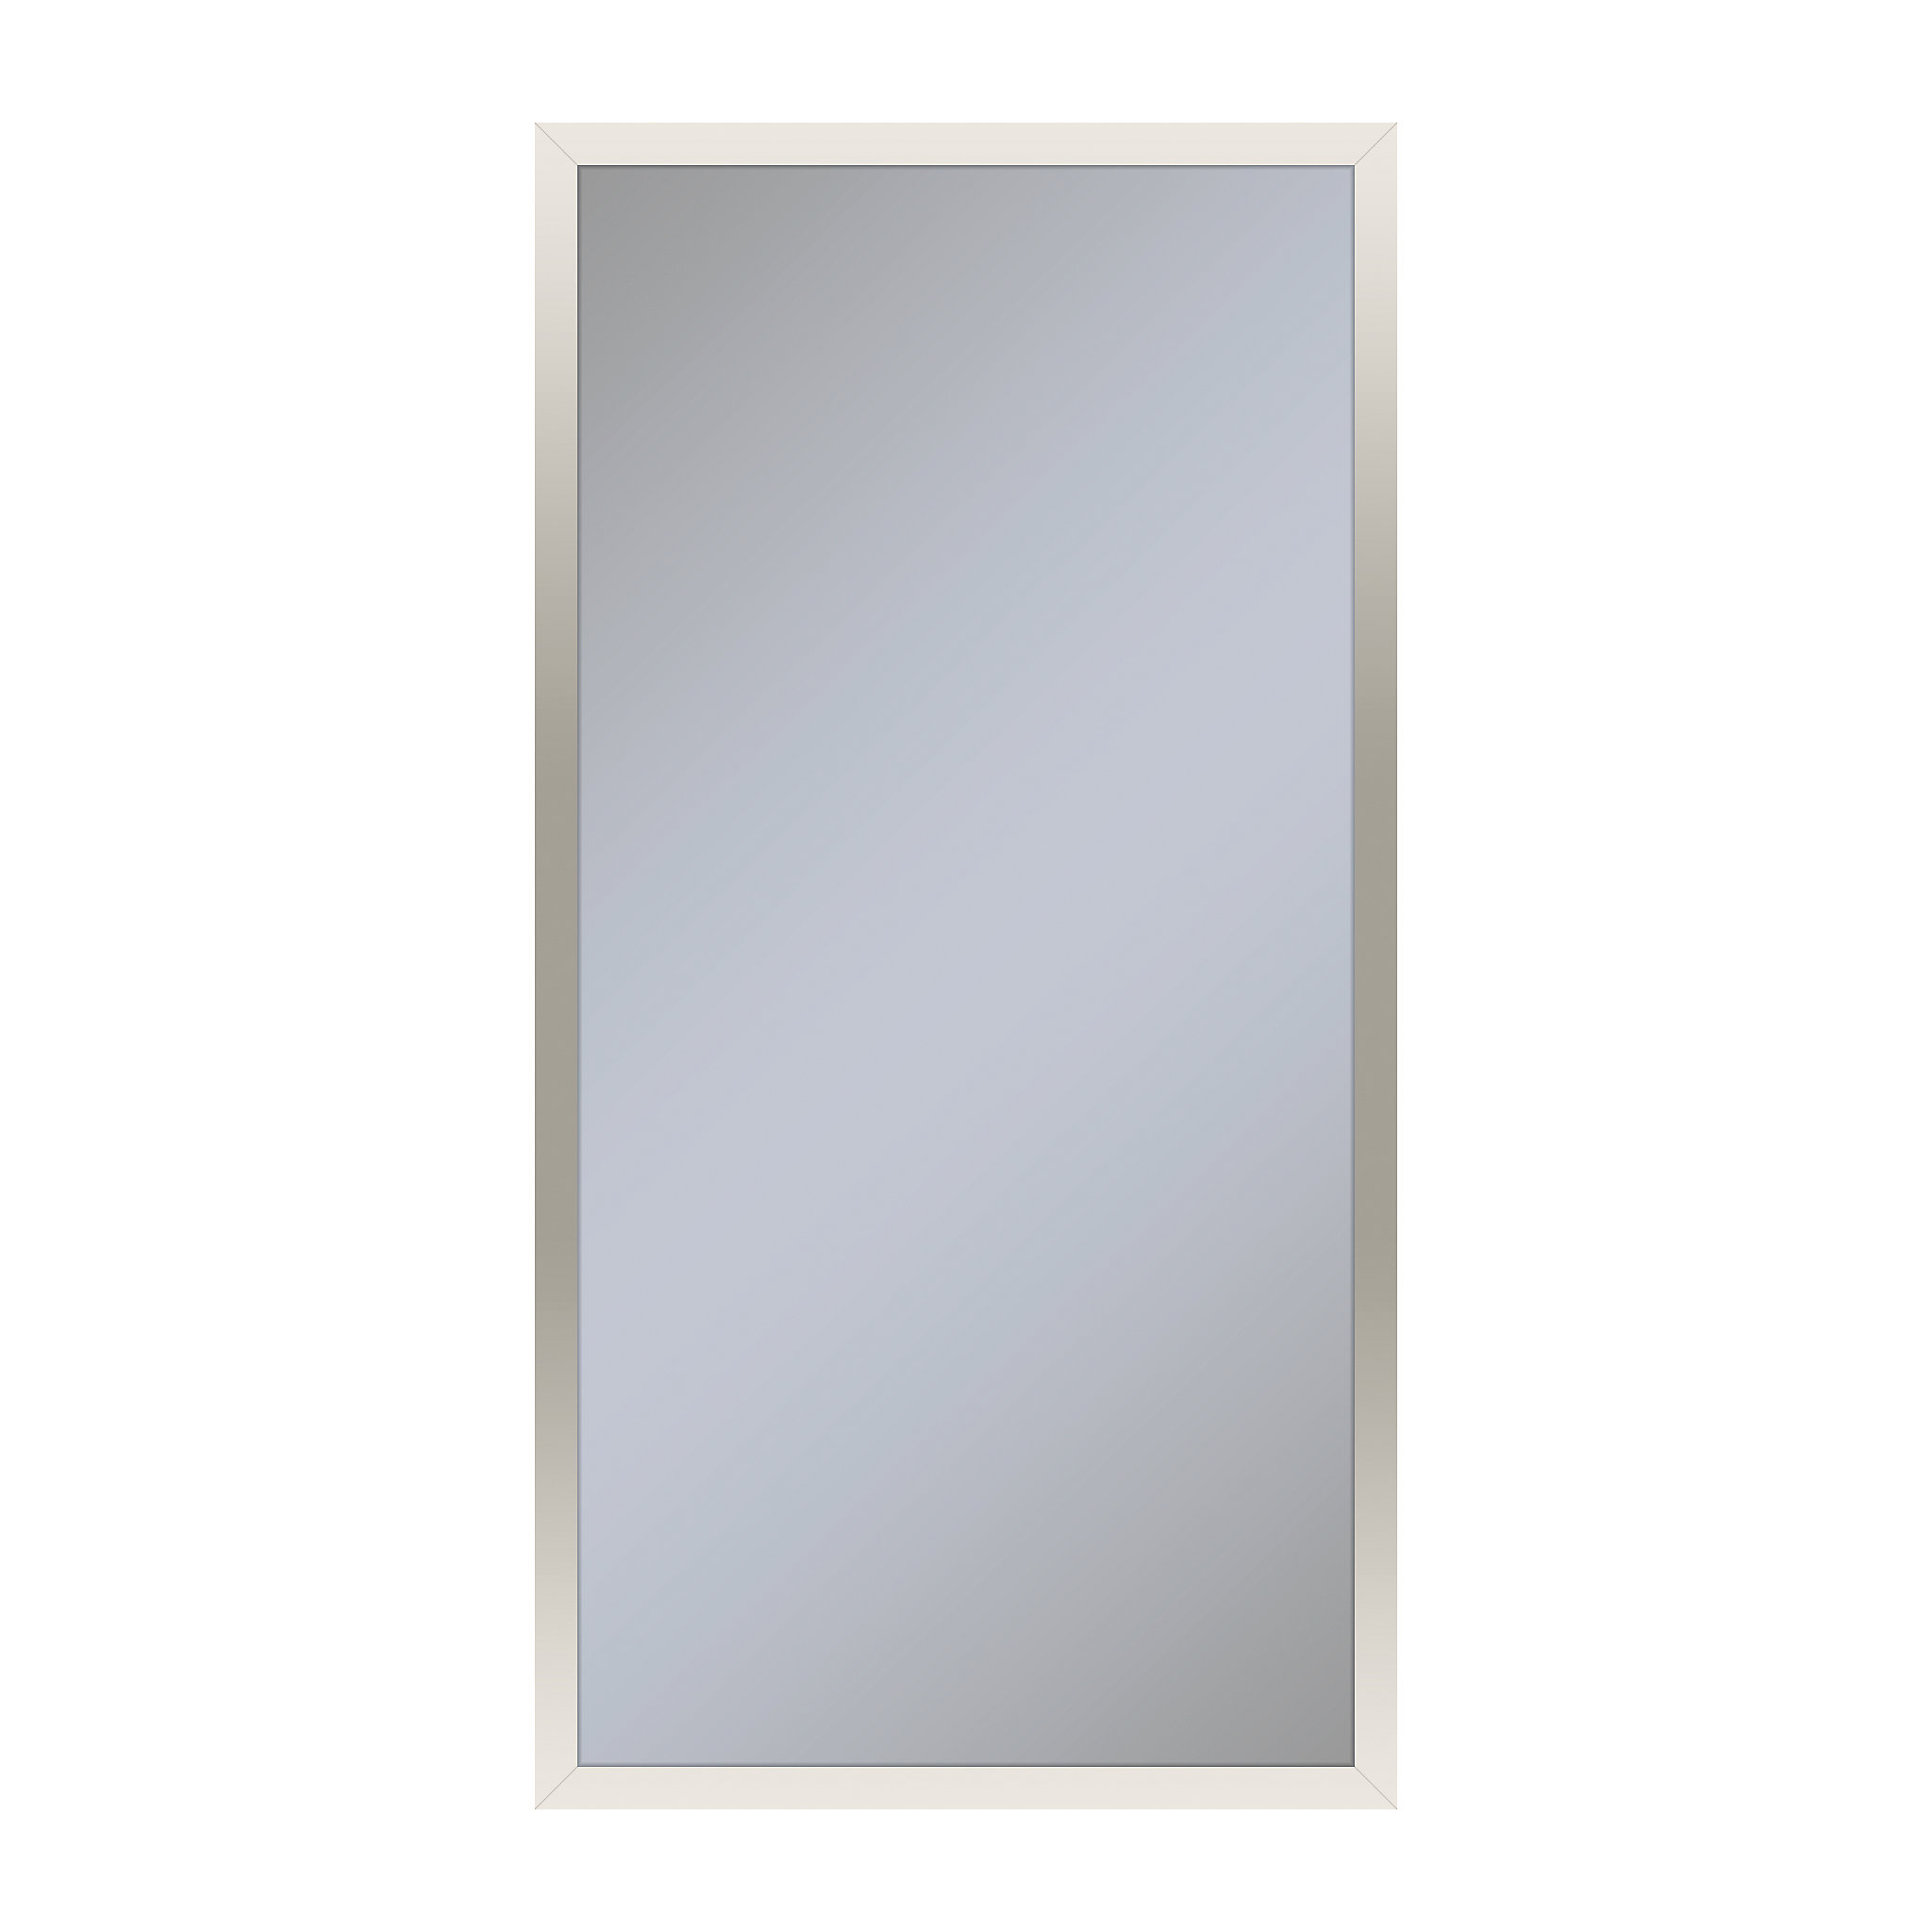 Robern PC1630D6TNN77 Profiles Framed Cabinet, 16" x 30" x 6", Polished Nickel, Non-Electric, Reversible Hinge